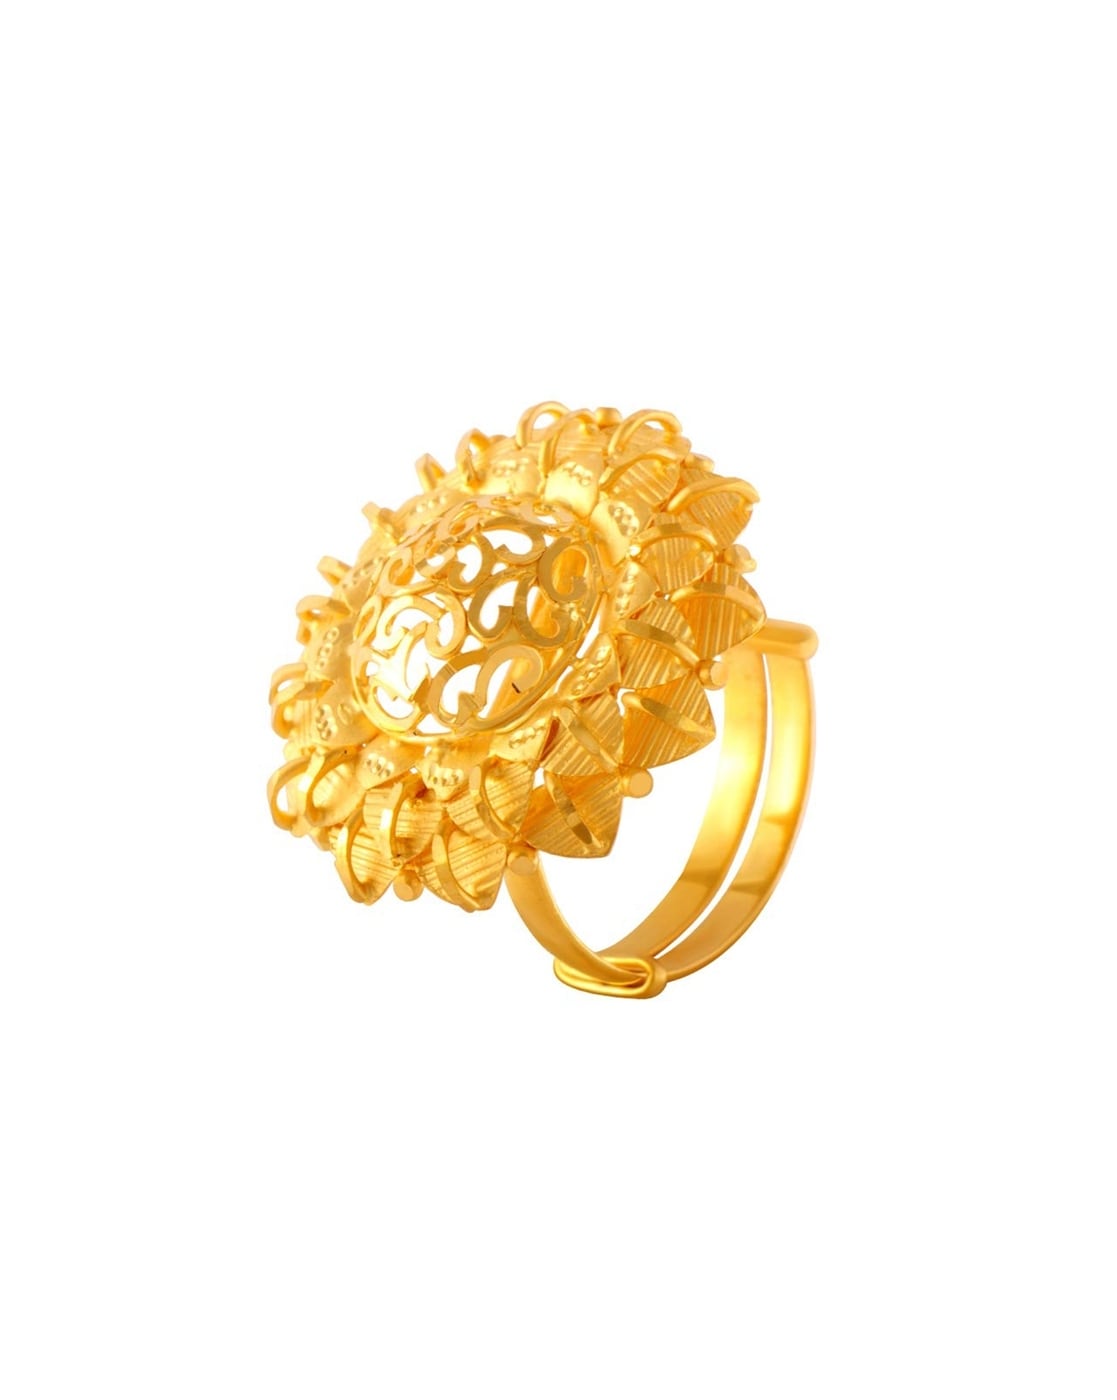 P.C. Chandra Jewellers - A beautiful double finger ring for that diva in  you. Exclusively designed by P.C. CHANDRA JEWELLERS. Buy this design online  from the comfort of your home at www.pcchandraindiaonline.com #